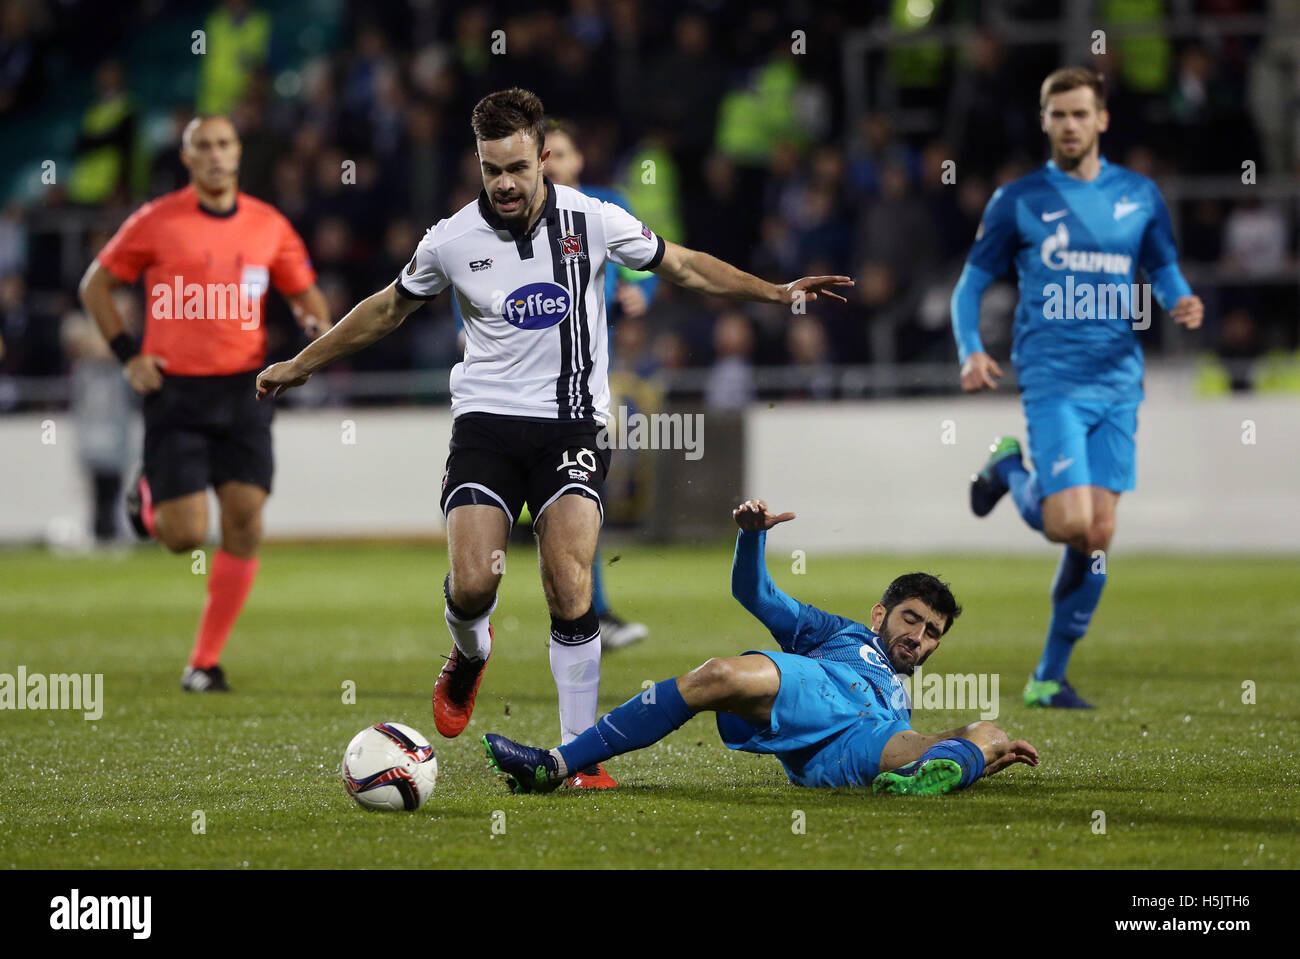 Dundalk's Robbie Benson (left) and Carlos Luis Neto battle for the ball during the UEFA Europa League match at Tallaght Stadium, Dublin. Stock Photo